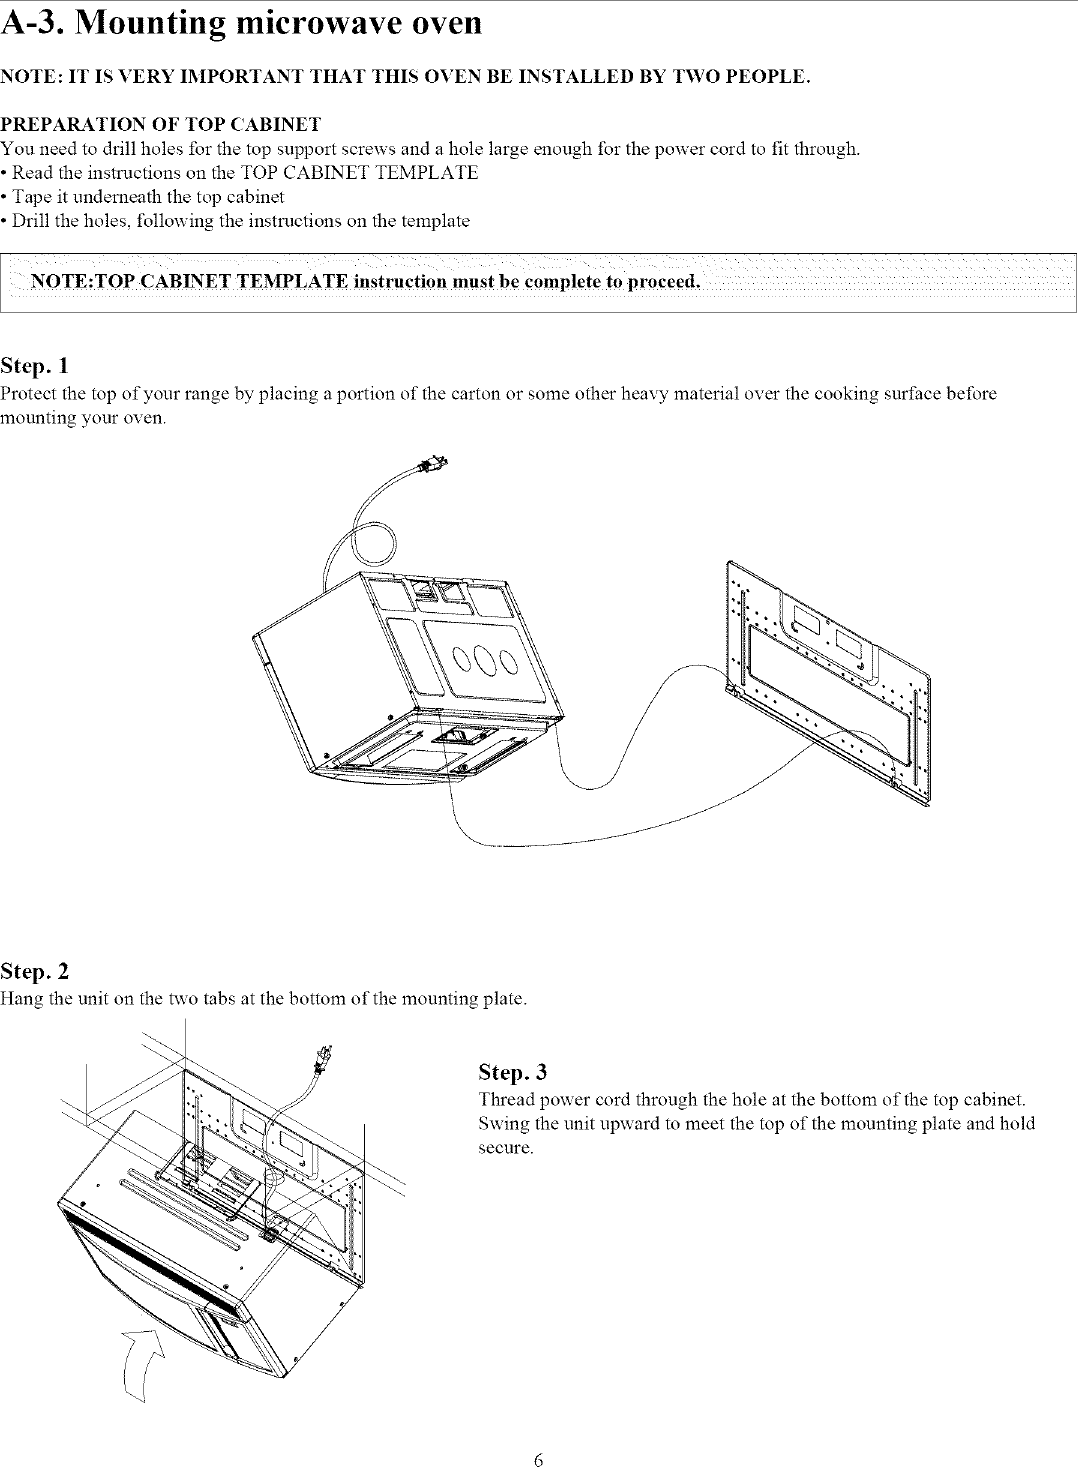 Page 6 of 8 - MAGIC  CHEF Microwave/Hood Combo Manual L0803304